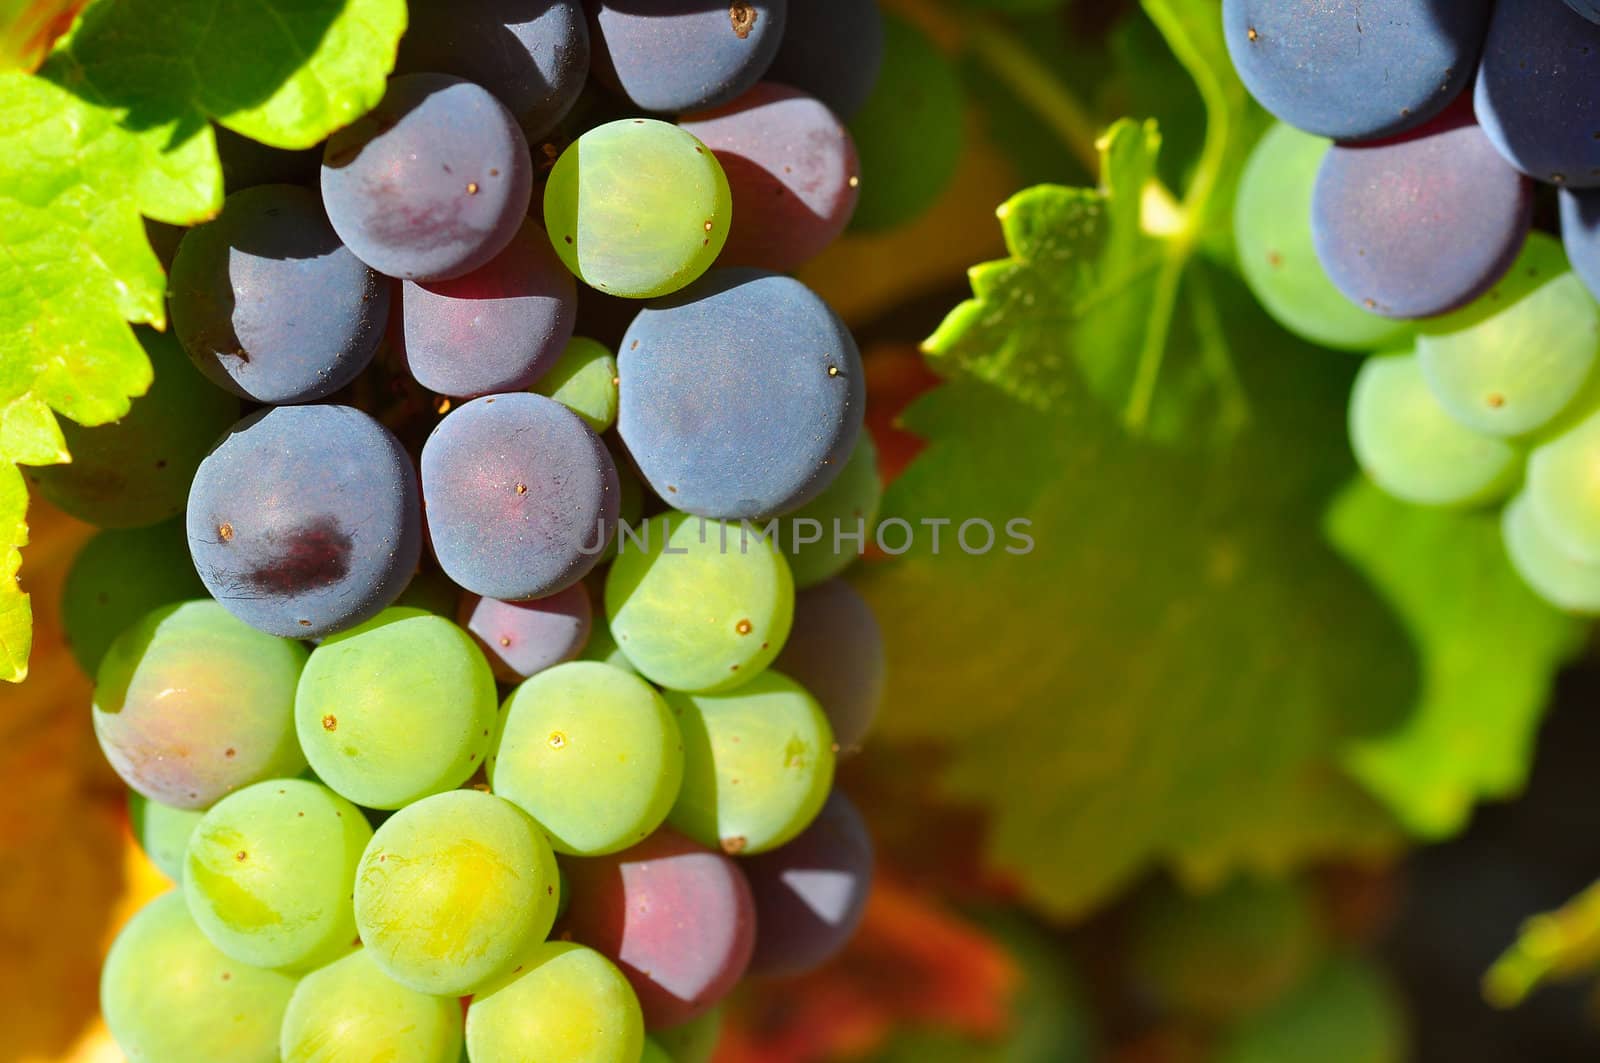 Violet and green wine grapes by ruigsantos